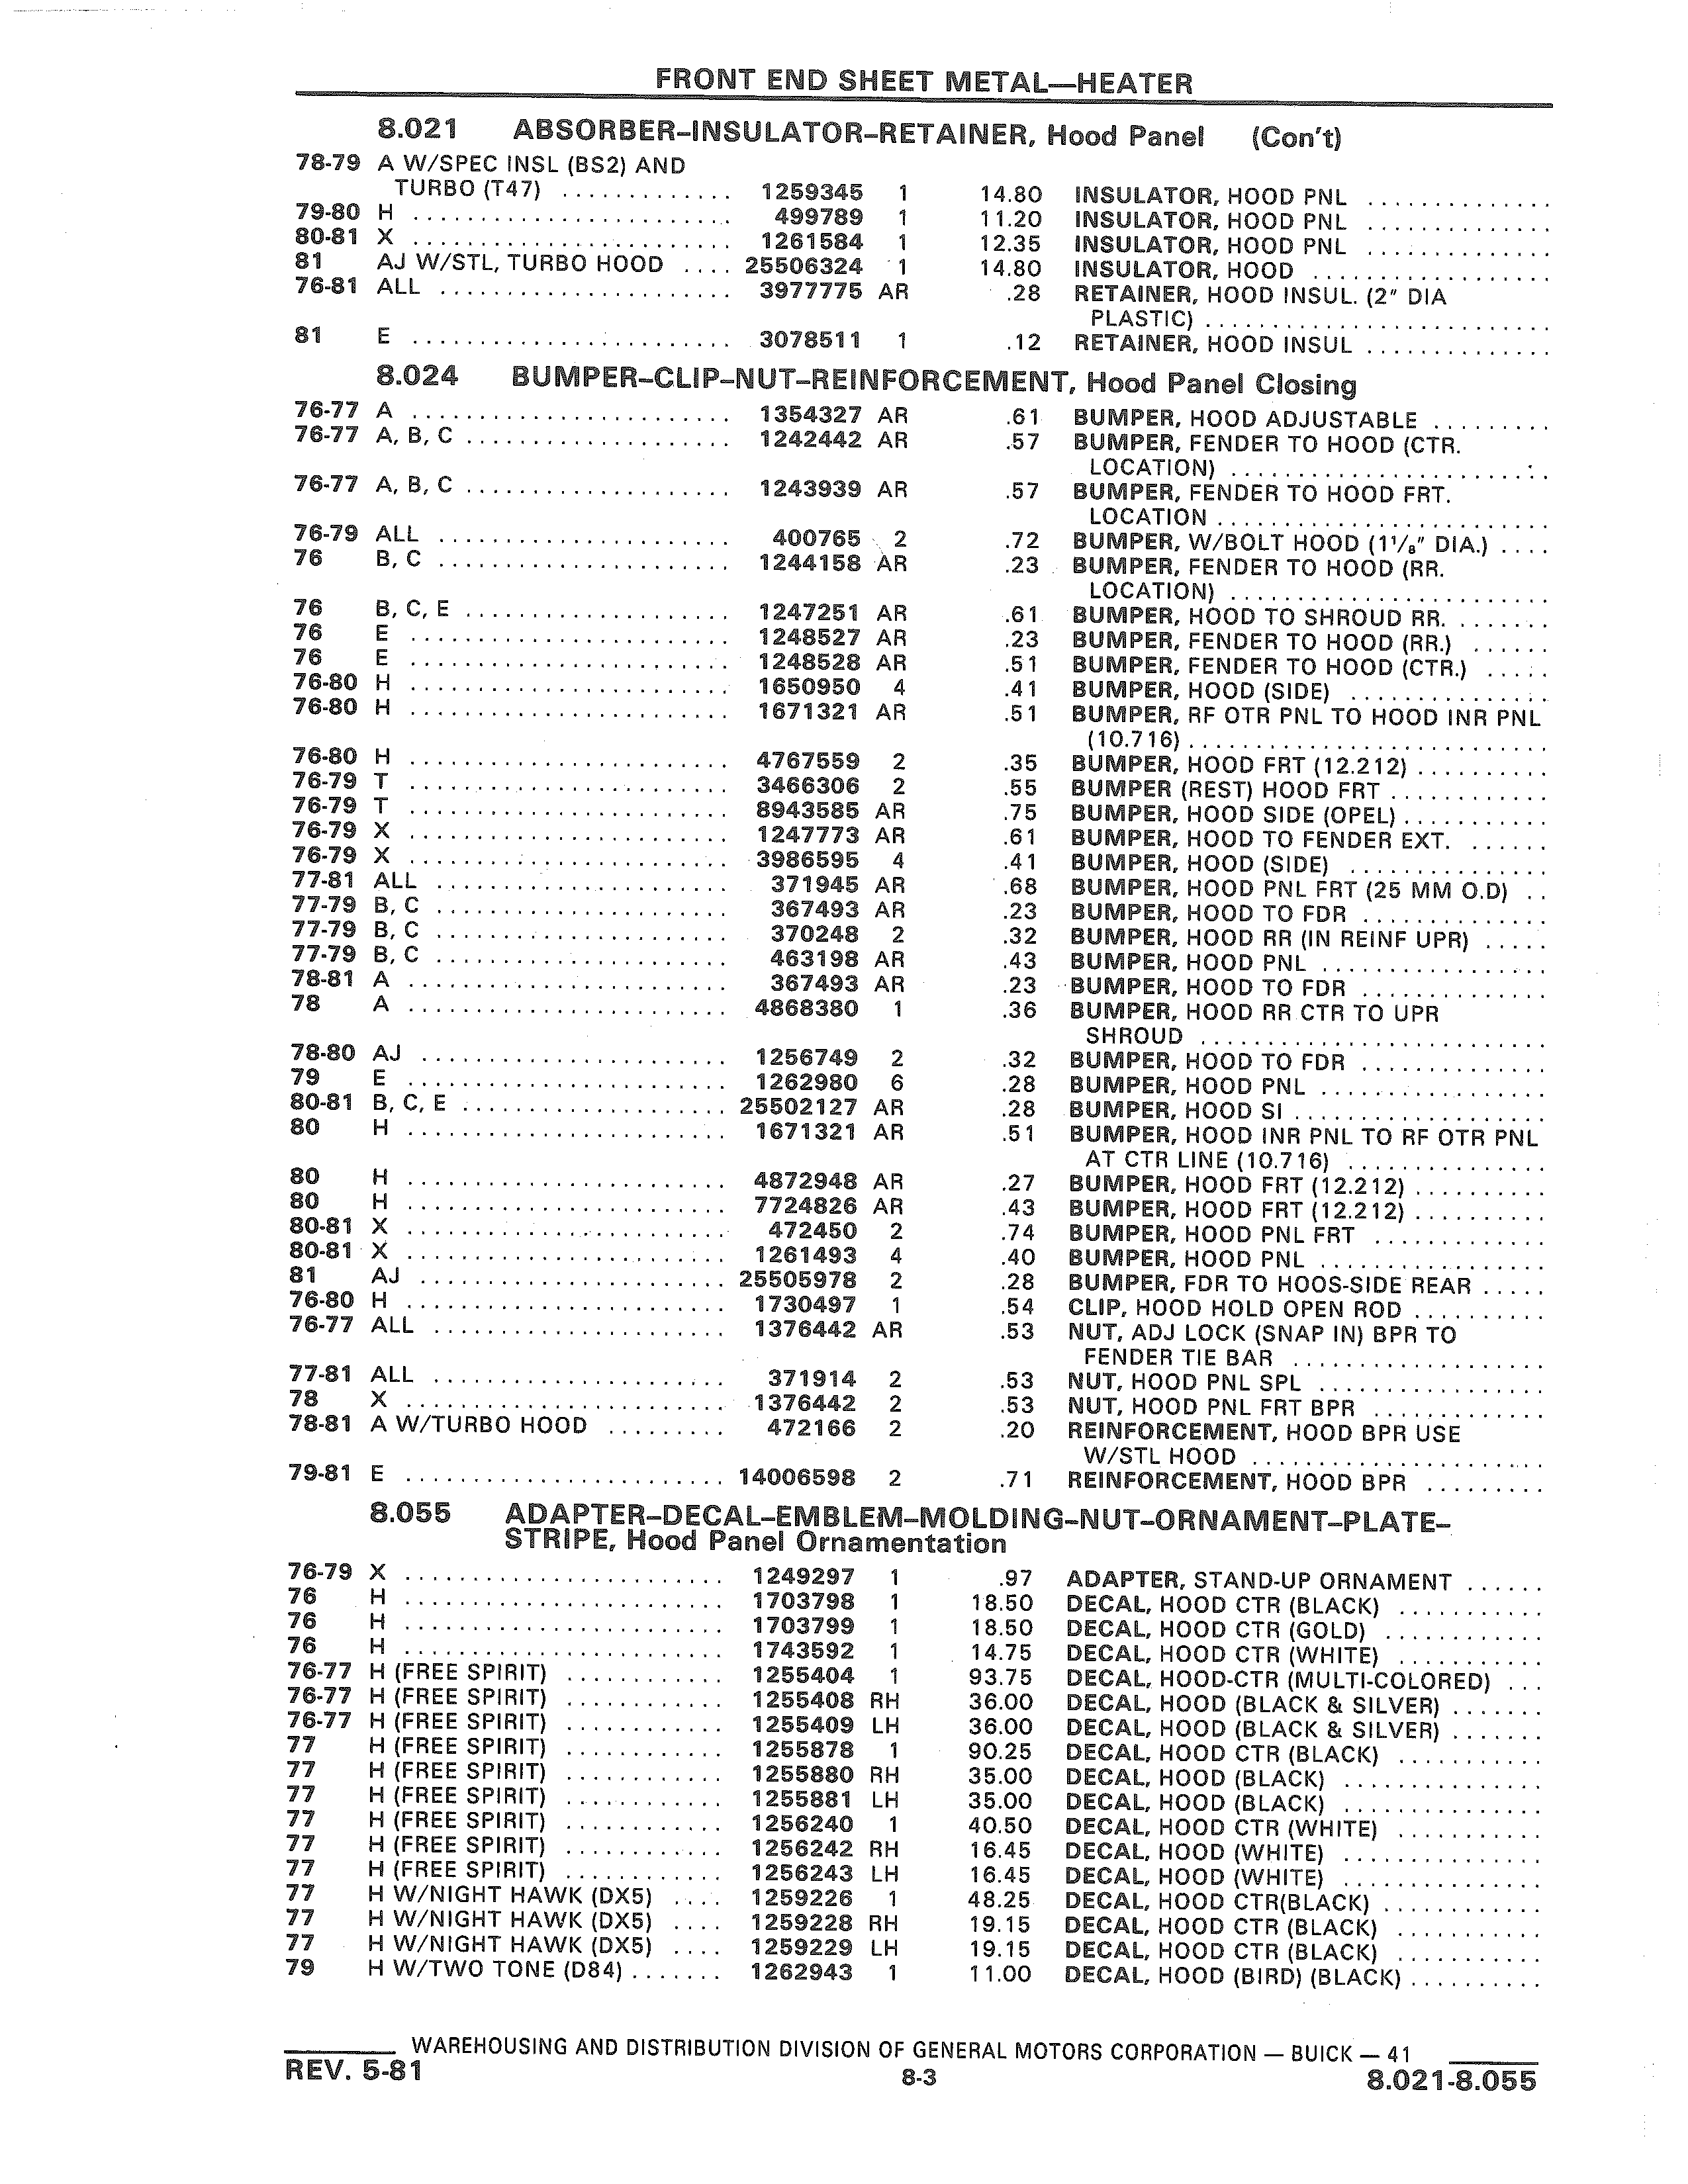 Parts and Accessories Catalog 41 May 1981